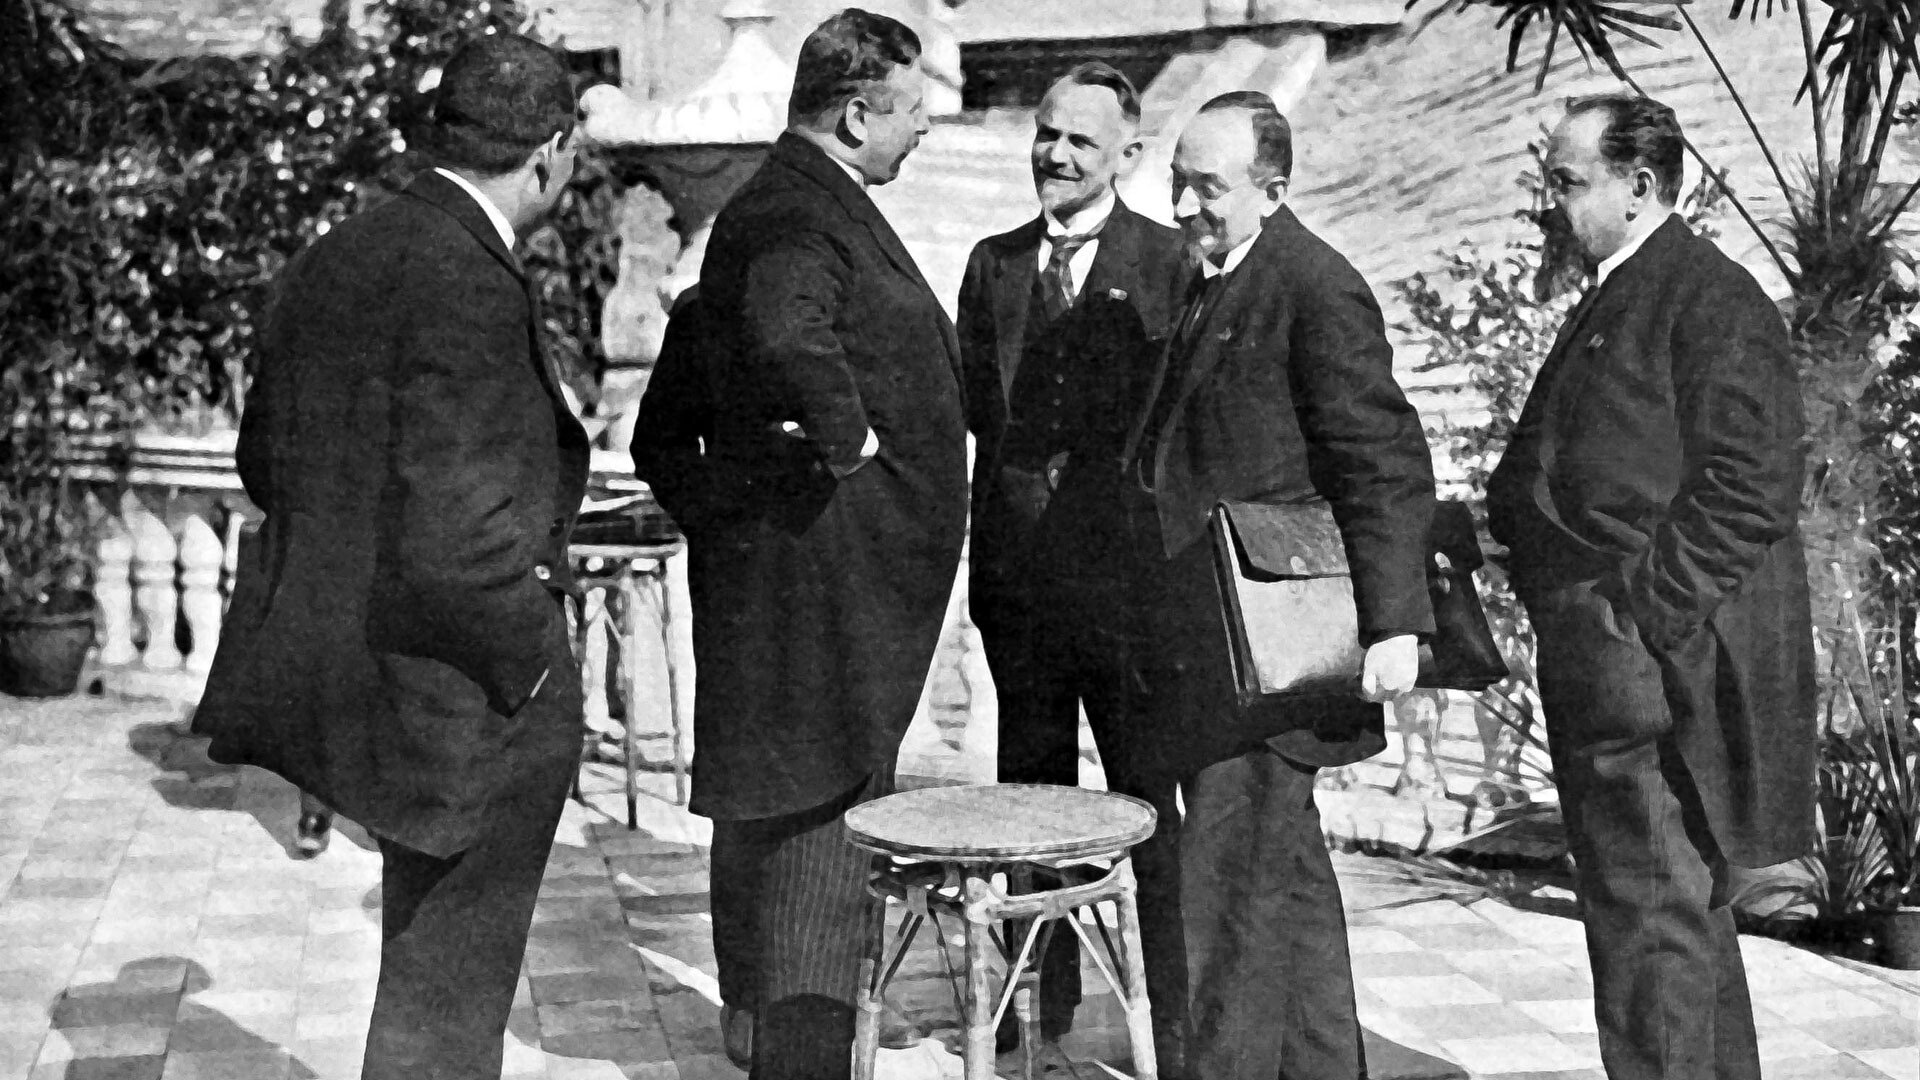 Russian and German diplomats in Rapallo.